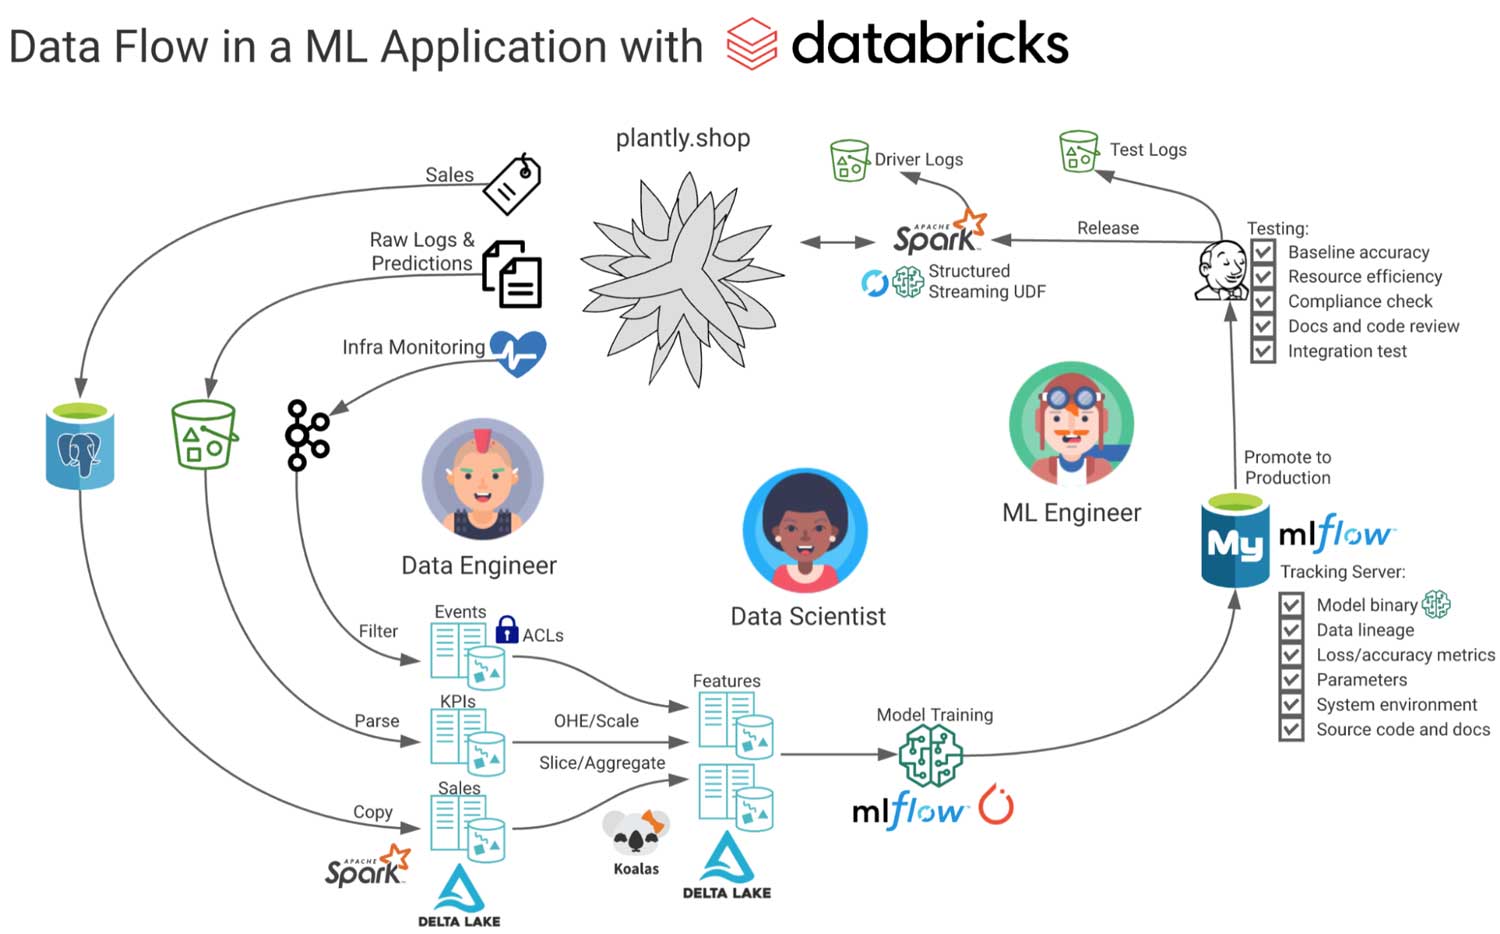 The typical data flow for an ML application project.